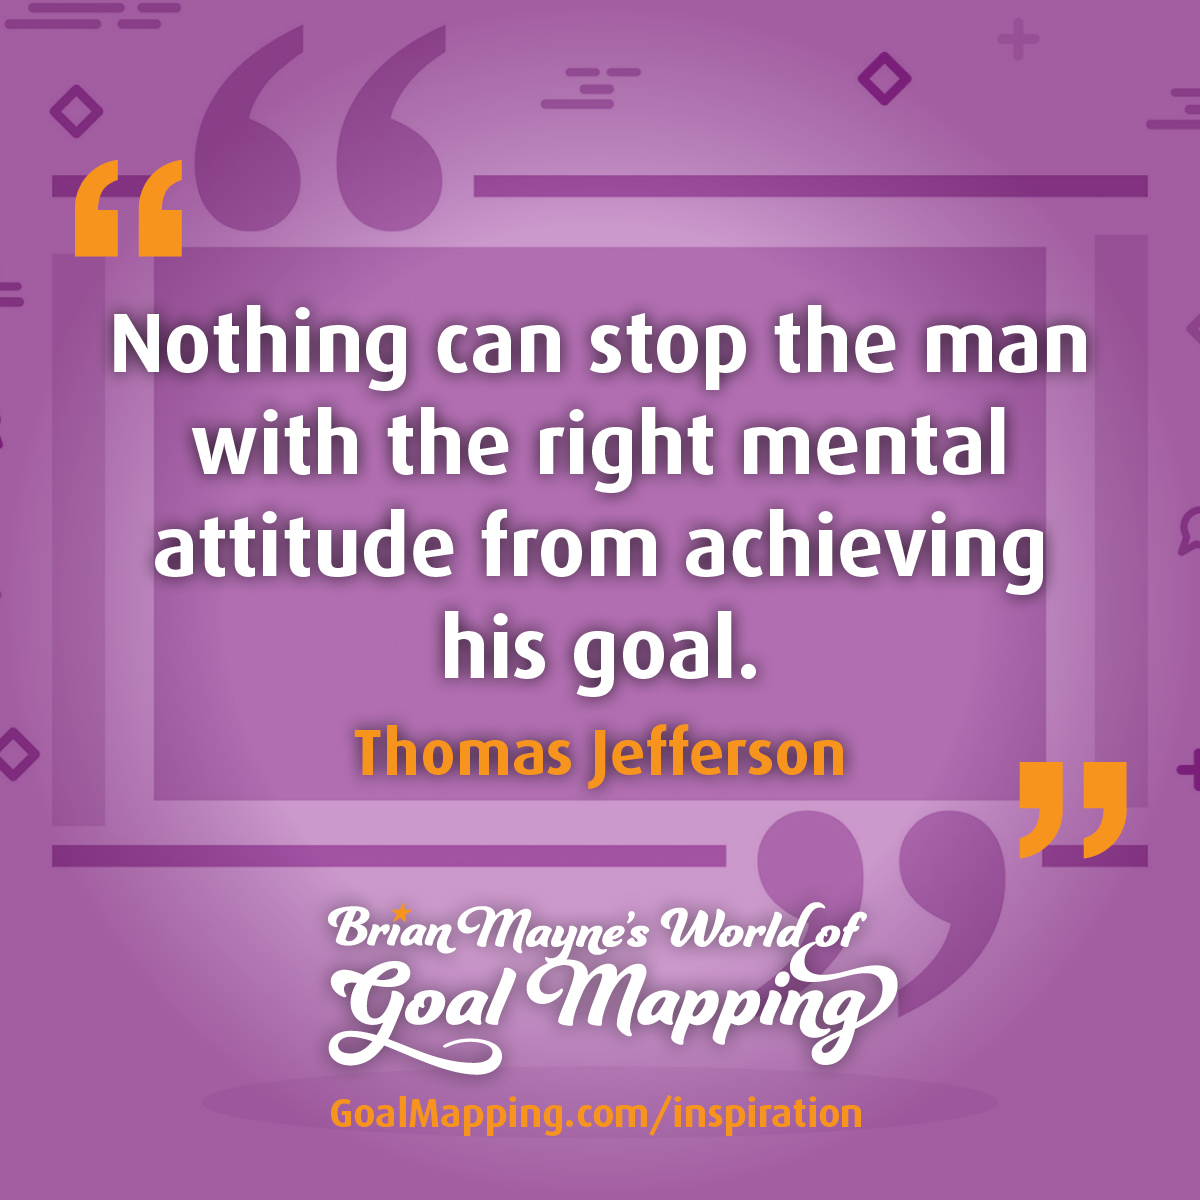 "Nothing can stop the man with the right mental attitude from achieving his goal." Thomas Jefferson